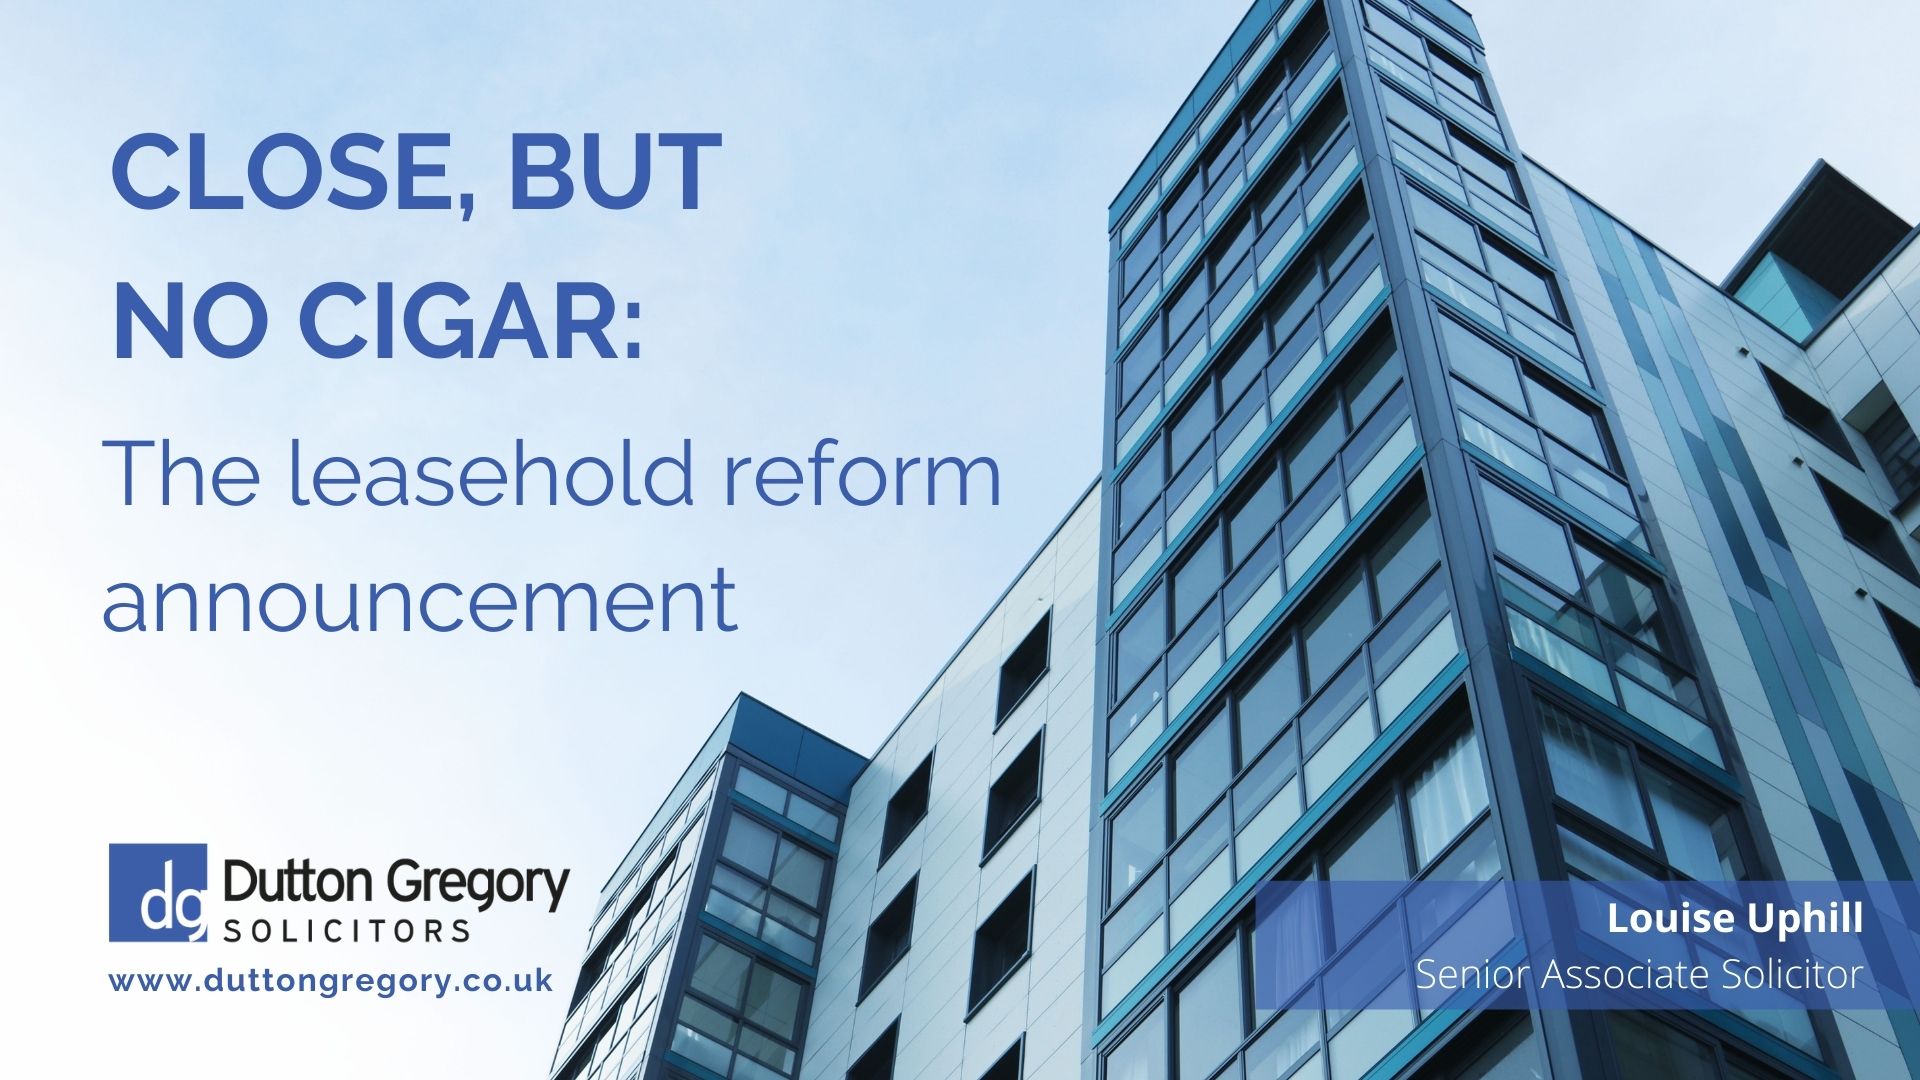 Close, but no cigar: the leasehold reform announcement